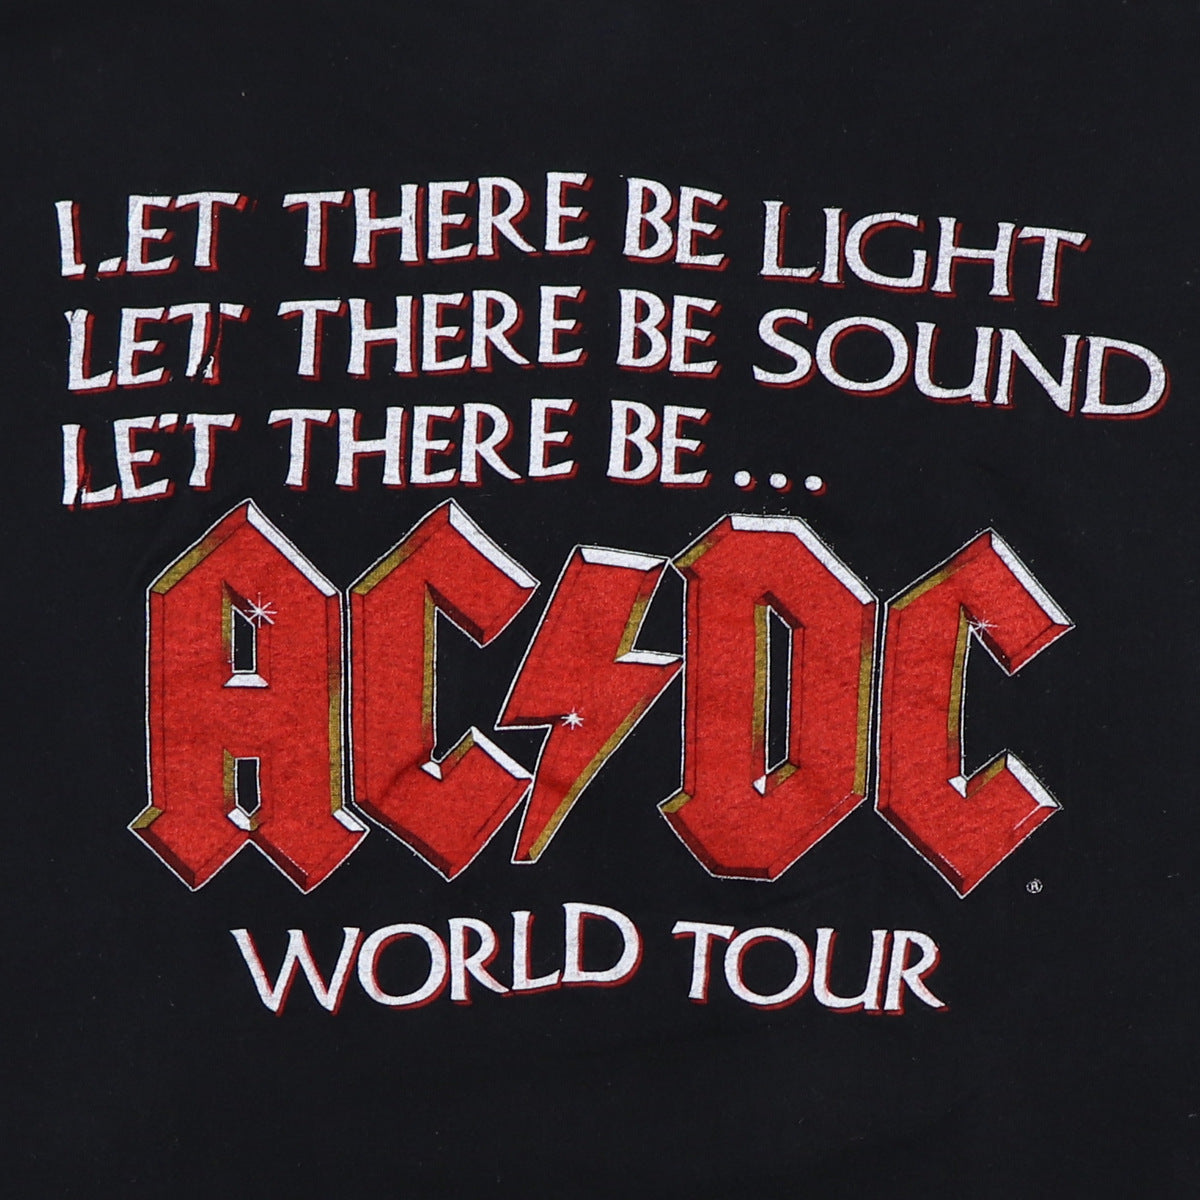 1980s ACDC Let There Be Rock Sleeveless Tour Shirt